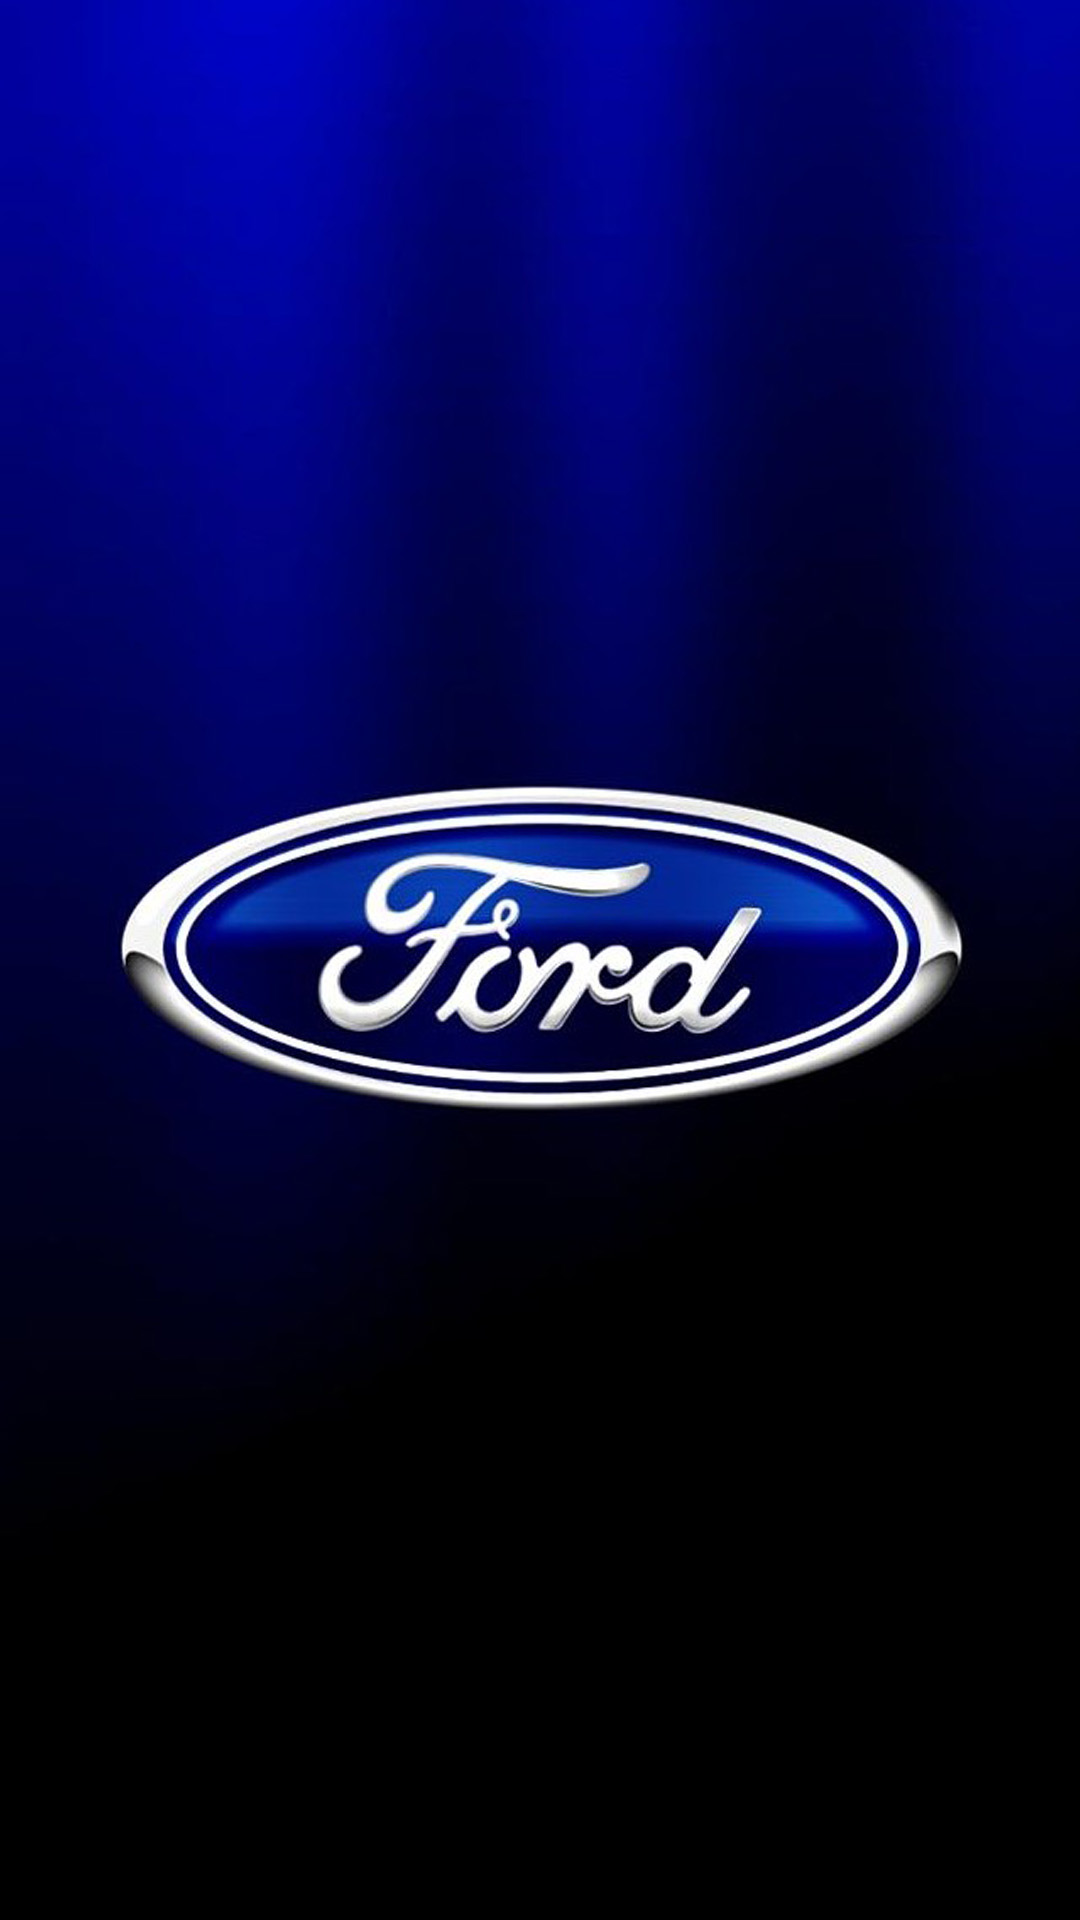 ford mustang logo wallpapers   Quotekocom 1080x1920